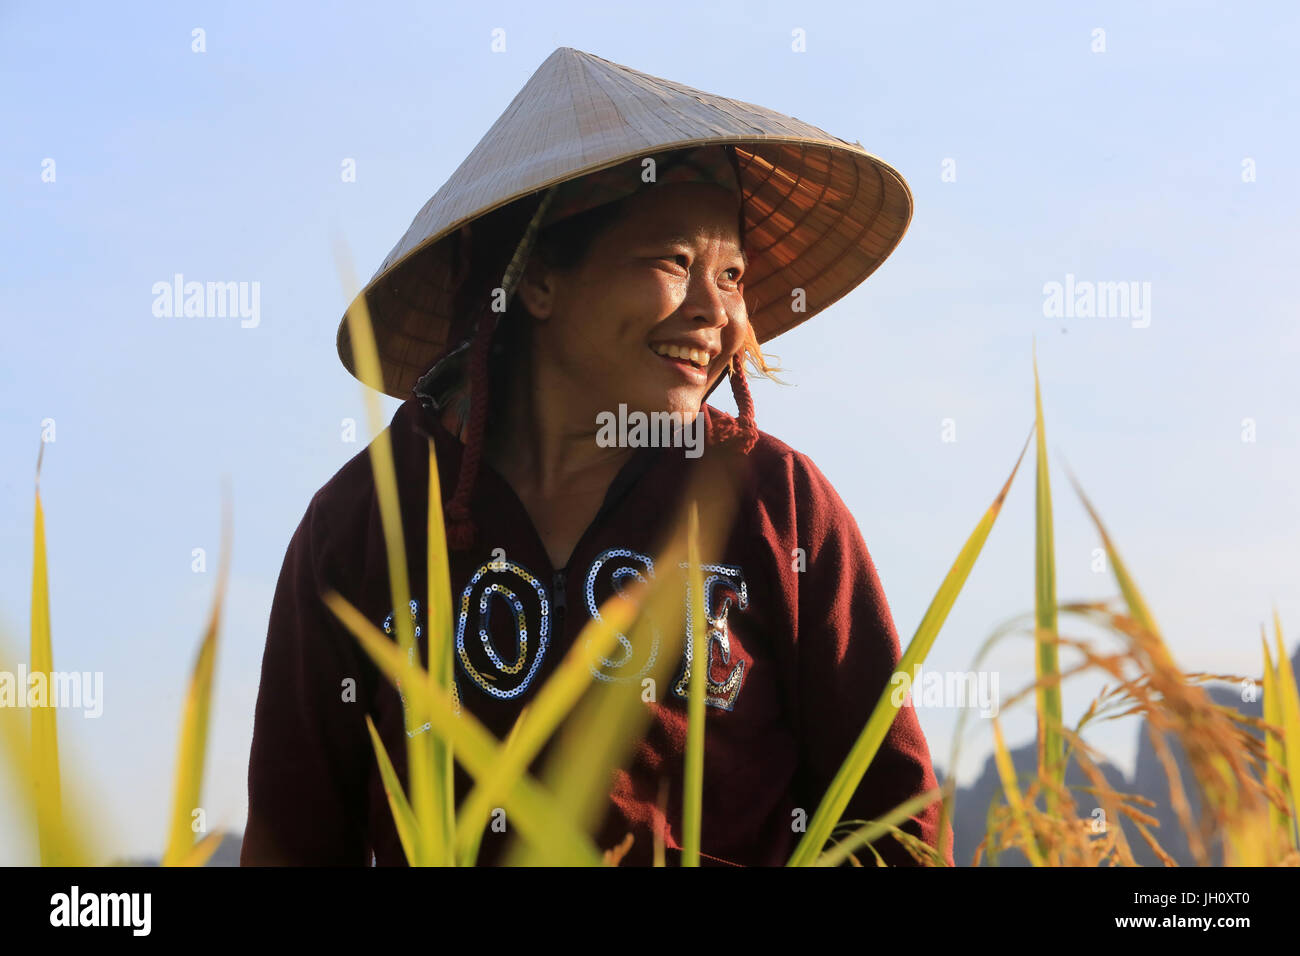 https://c8.alamy.com/comp/JH0XT0/lao-armer-wearing-traditional-hat-and-working-in-rice-fields-in-rural-JH0XT0.jpg